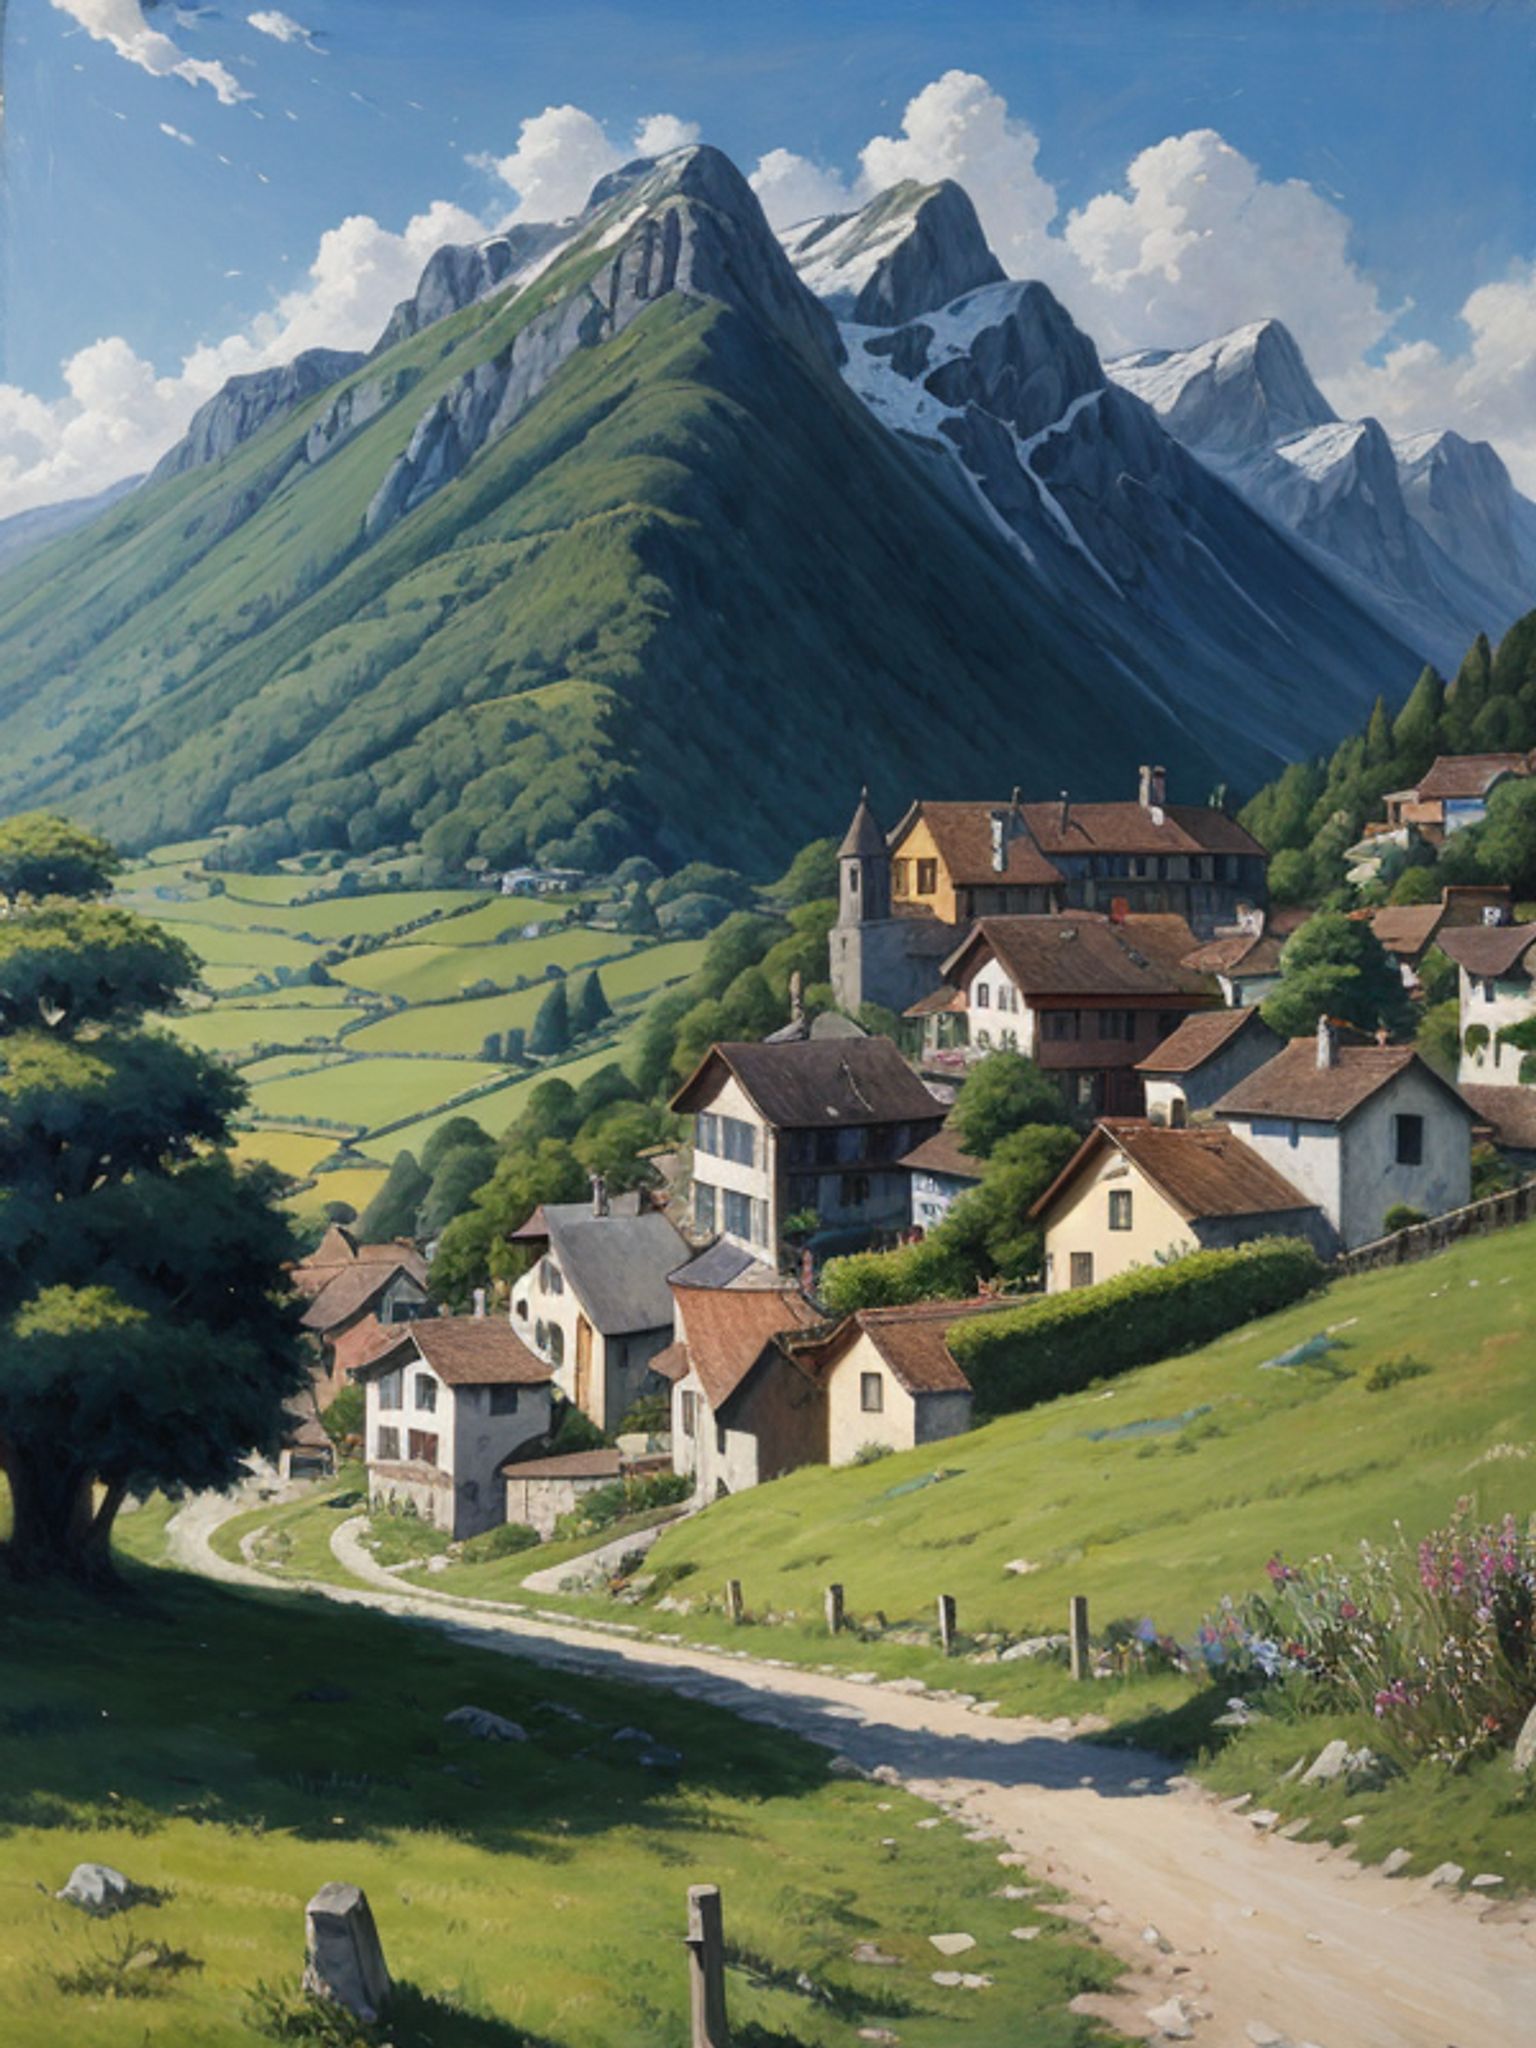 Landscape-painting-of-a-Small-Swiss-village-Anime-4zyy